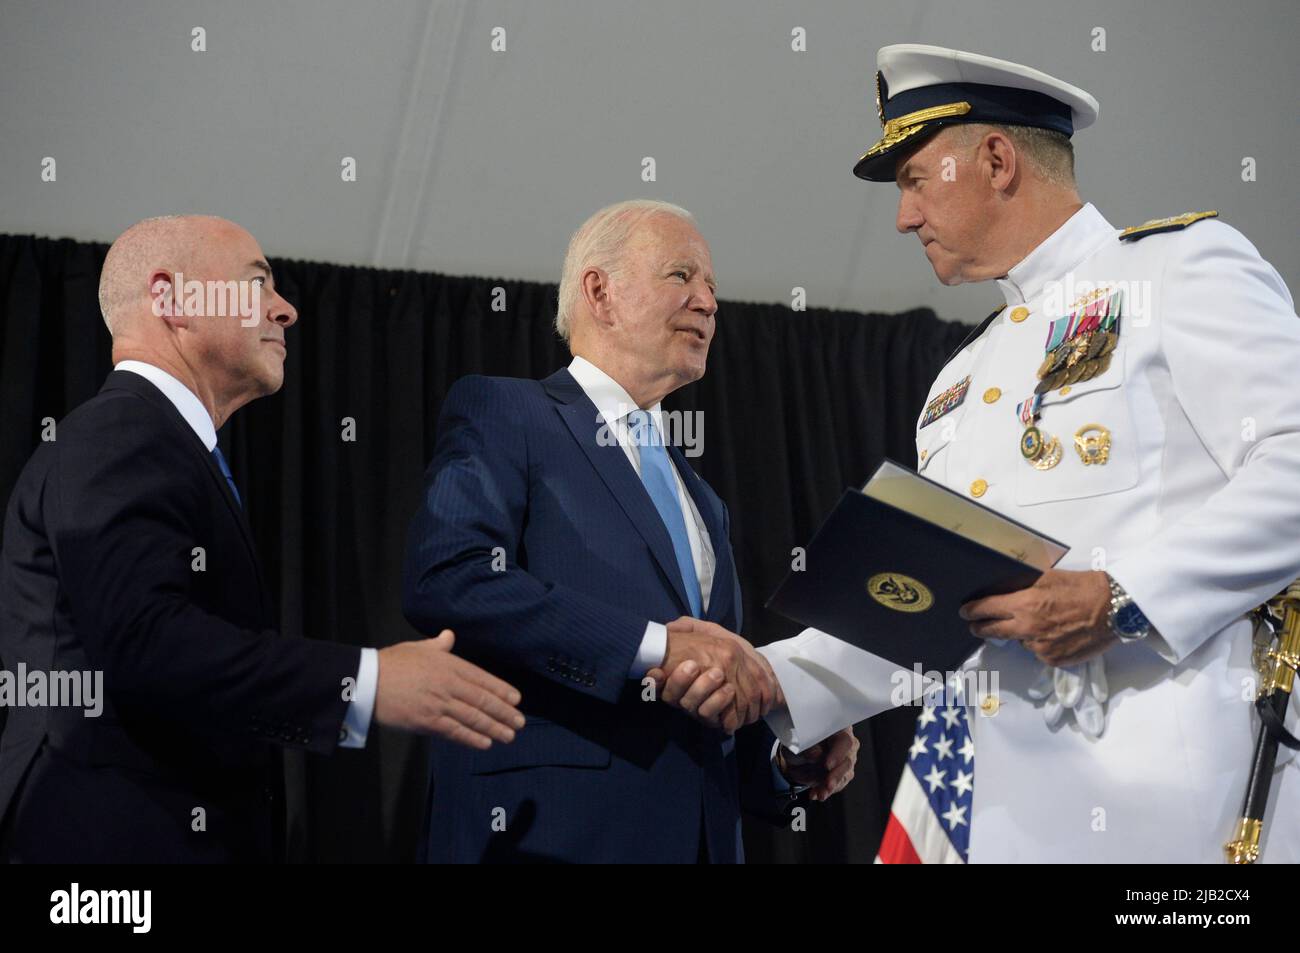 United States Coast Guard Adm. Karl L. Schultz shakes hands with US President Joe Biden and US Secretary of Homeland Security Alejandro Mayorkas, left, during a change of command ceremony at Coast Guard Headquarters in Washington, DC on Wednesday, June 1, 2022. Coast Guard Admiral Linda Fagan is taking over command from Schultz. Credit: Bonnie Cash/Pool via CNP /MediaPunch Stock Photo